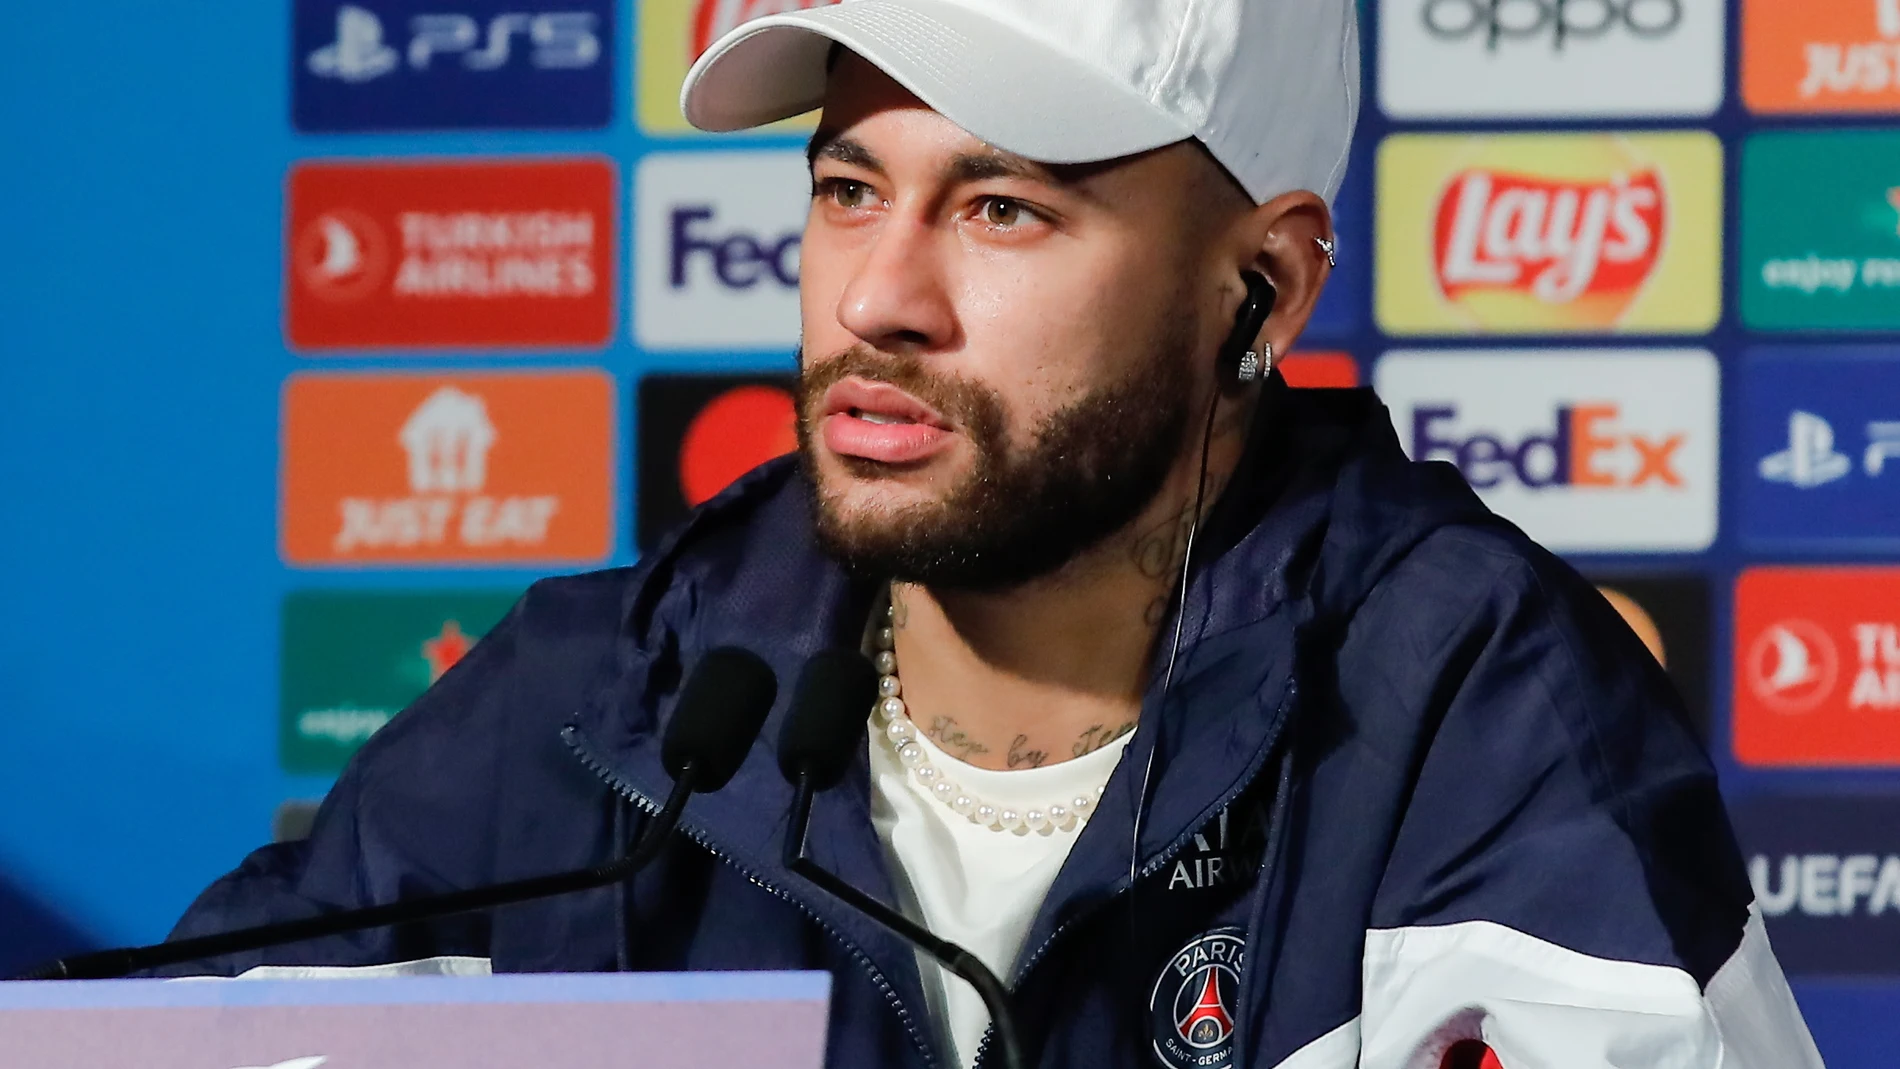 Paris (France), 13/02/2023.- PSG player Neymar attends a press conference at the Parc des Princes stadium in Paris, France, 13 February 2022. PSG will play against FC Bayern Munich on 14 February 2023 in the Round of 16 of the UEFA Champions League. (Liga de Campeones, Francia) EFE/EPA/TERESA SUAREZ